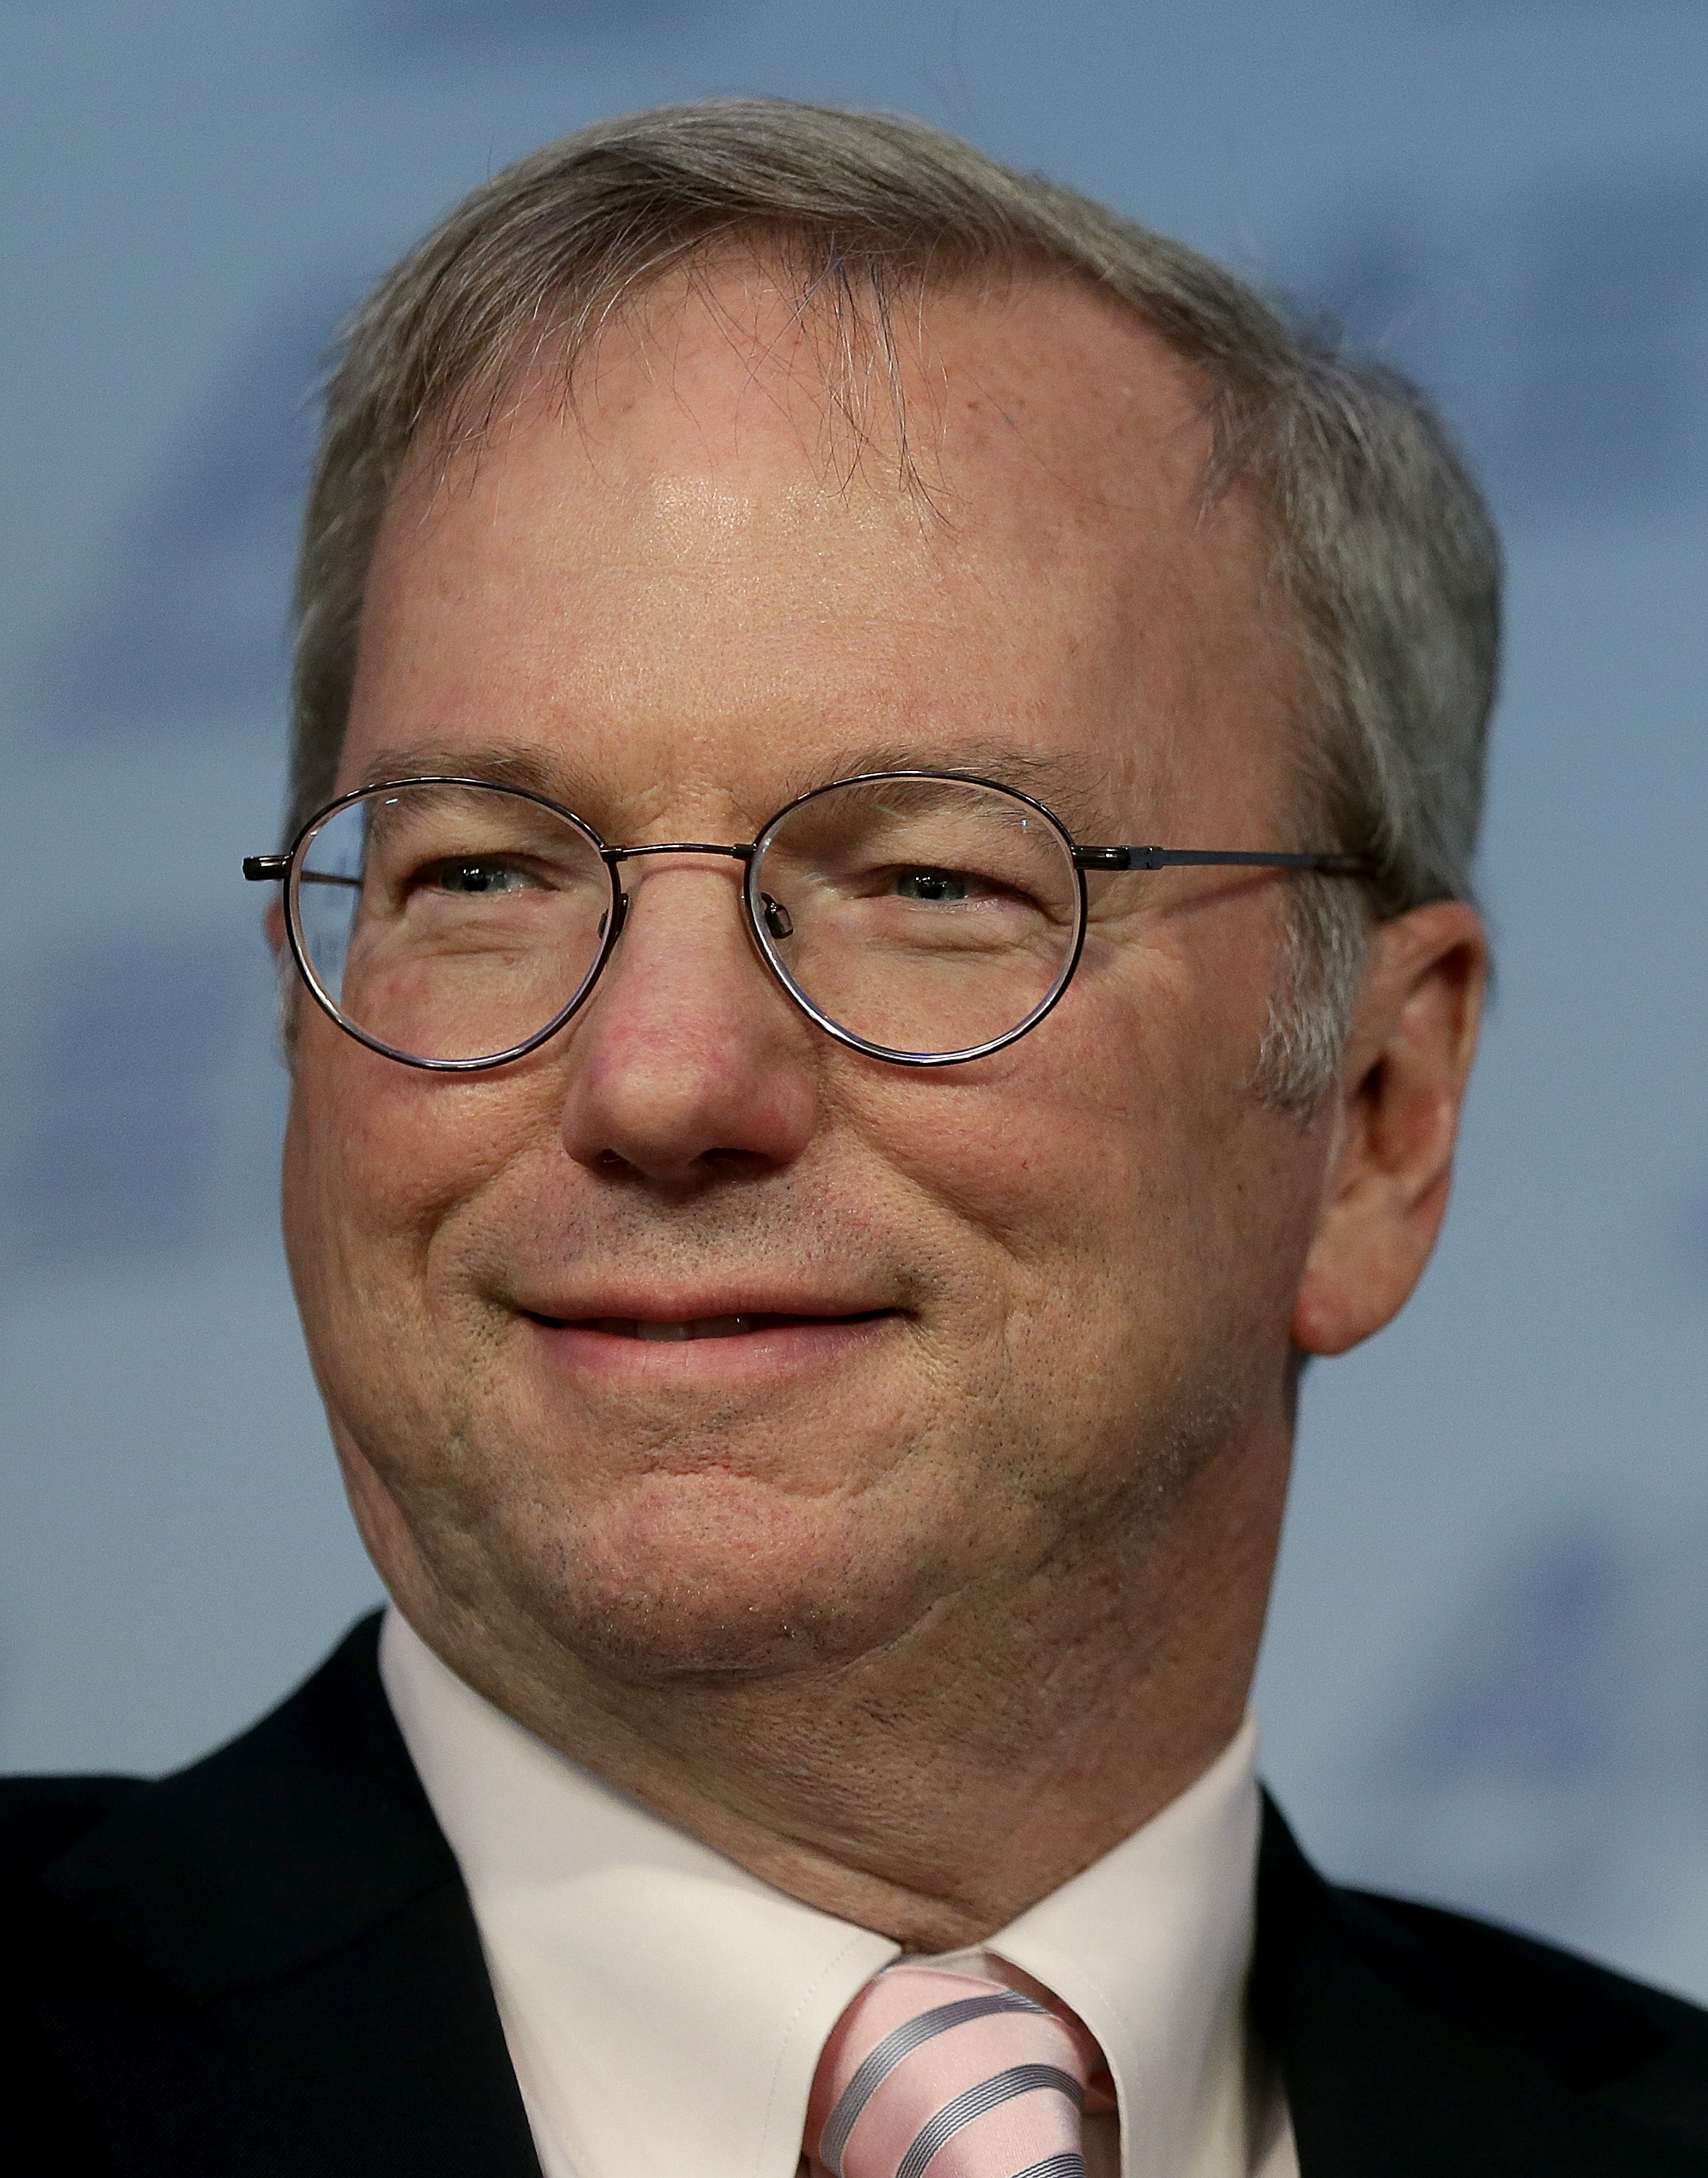 Eric Schmidt at the American Enterprise Institute in Washington, D.C. on March 18, 2015.